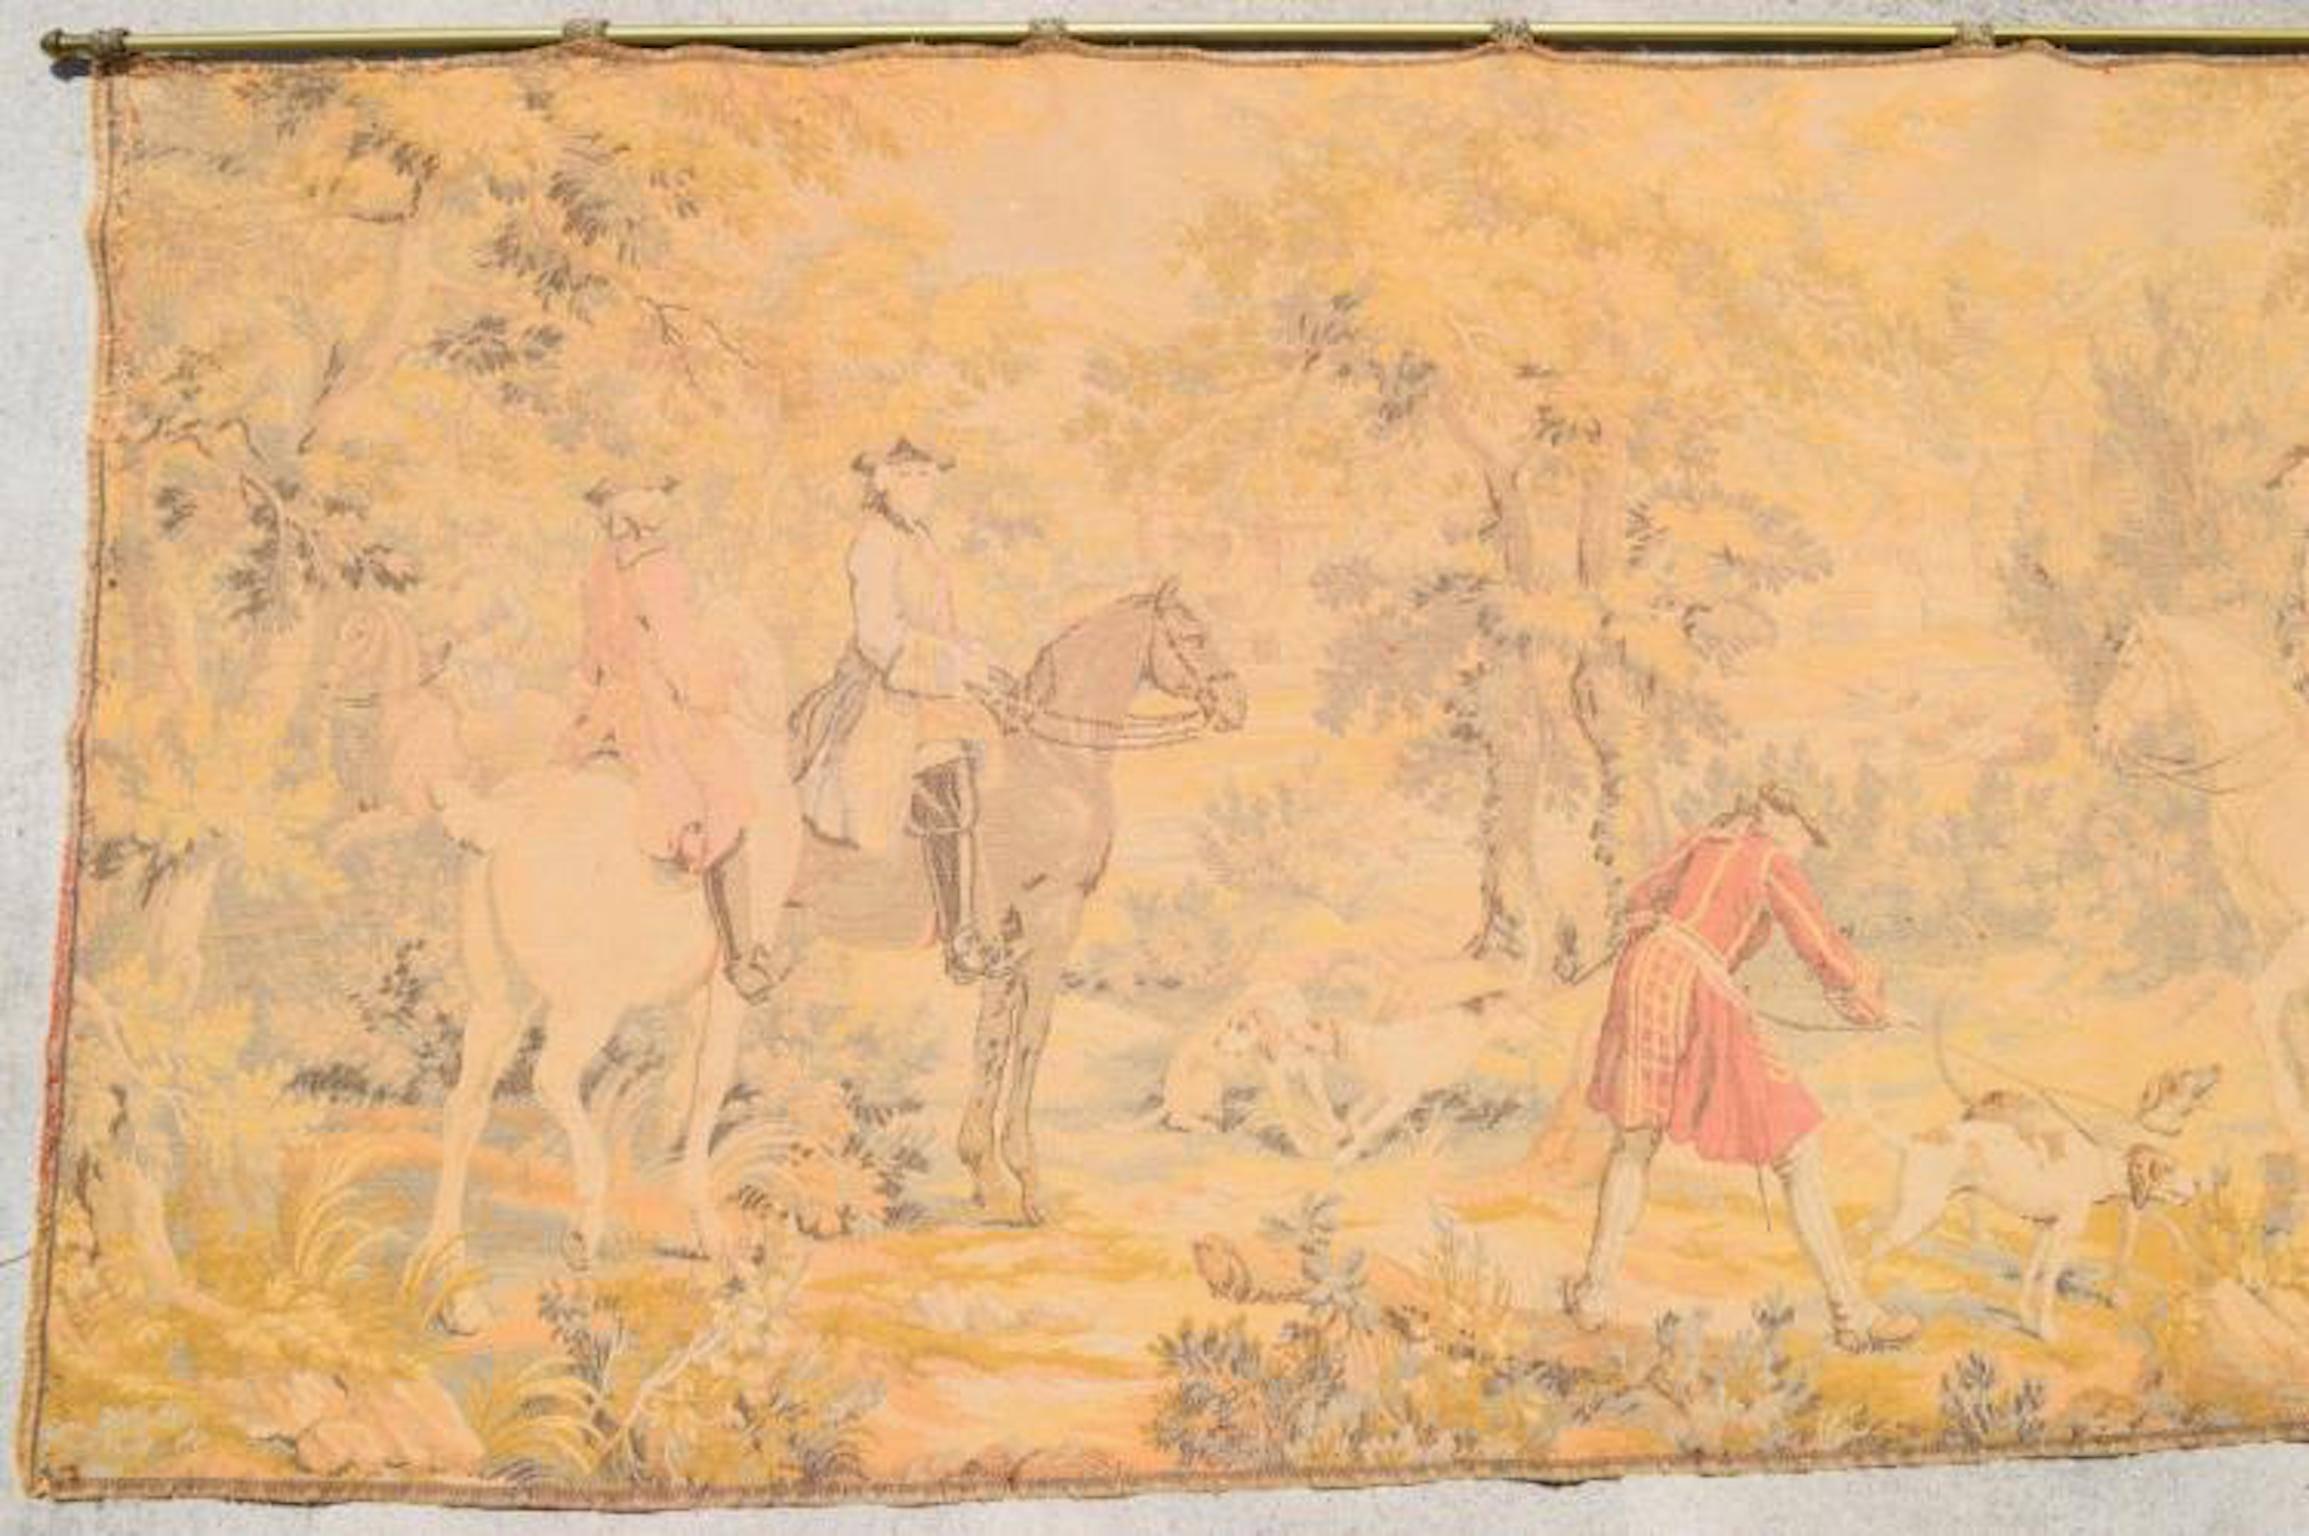 19th century French Rococo Revival tapestry textile depicting a forest scene with men on horses and a man with two dogs.